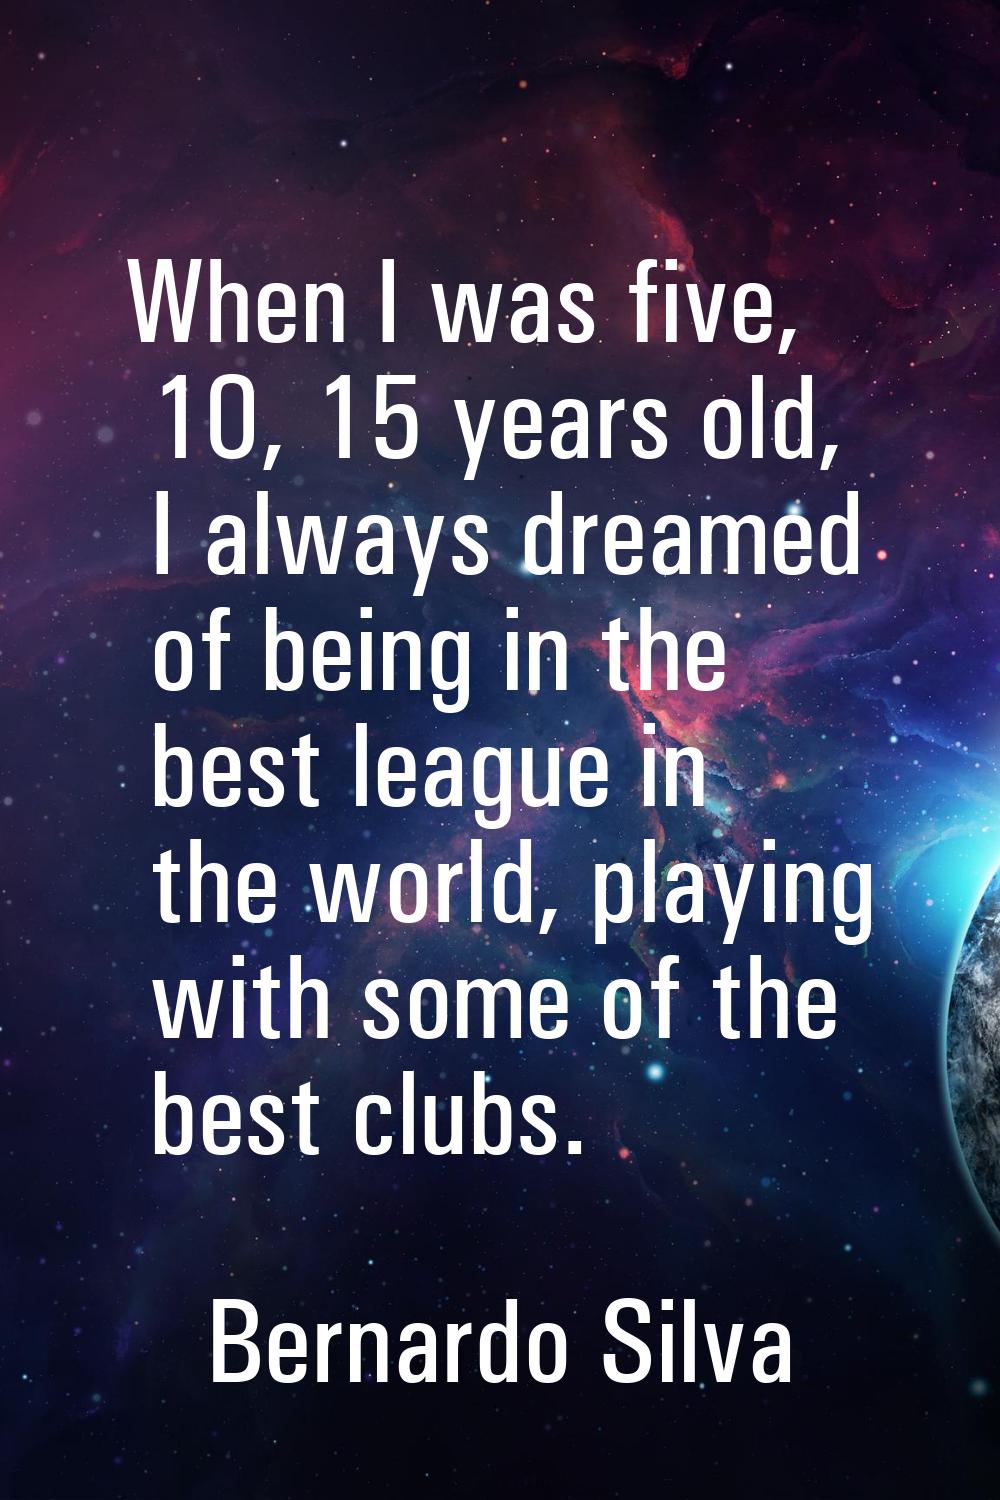 When I was five, 10, 15 years old, I always dreamed of being in the best league in the world, playi